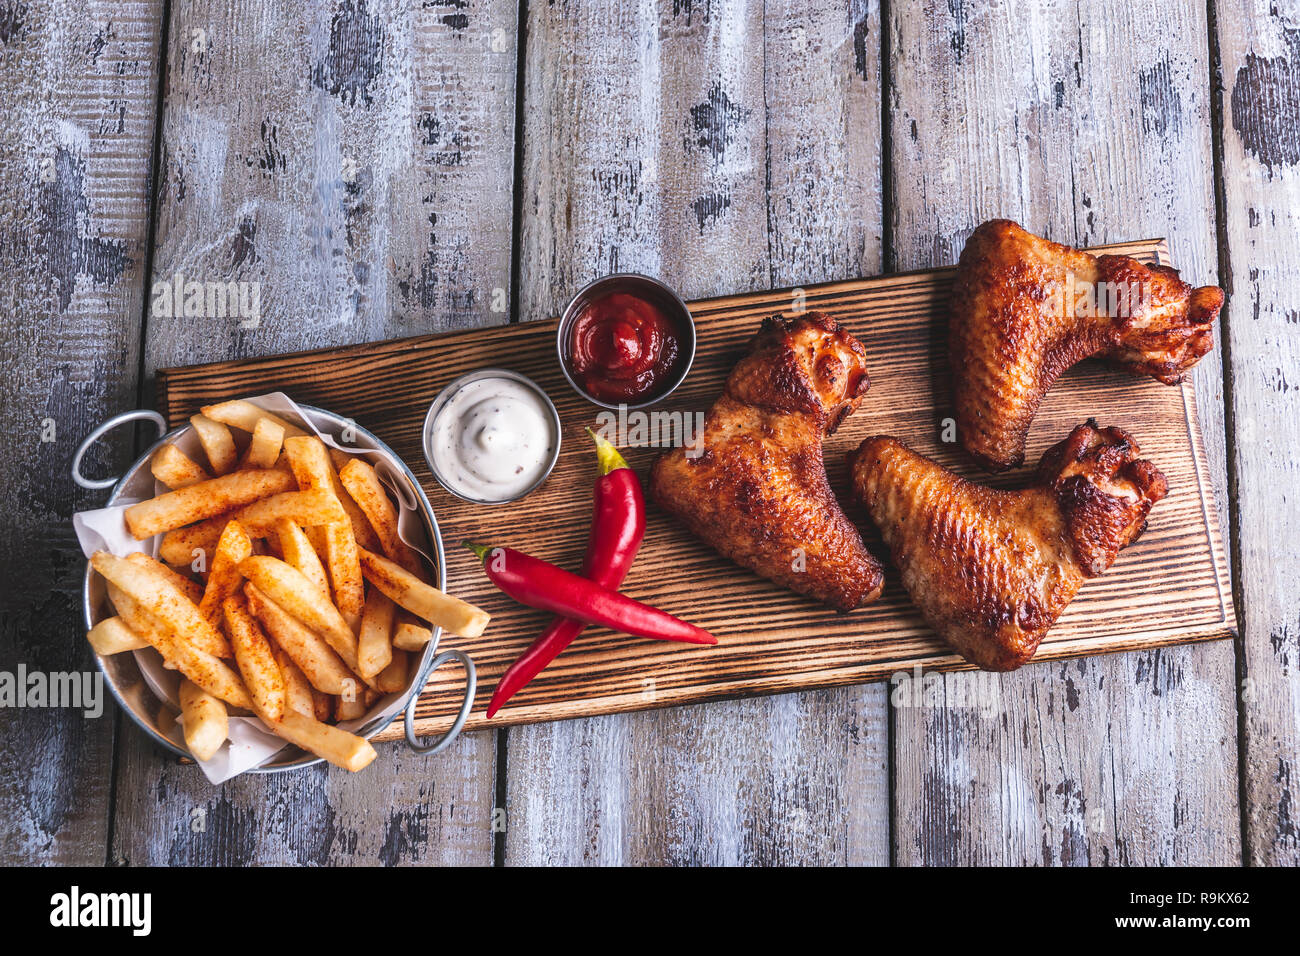 Grilled chicken wings, french fries, white and red sauce nuts on a wooden surface Stock Photo